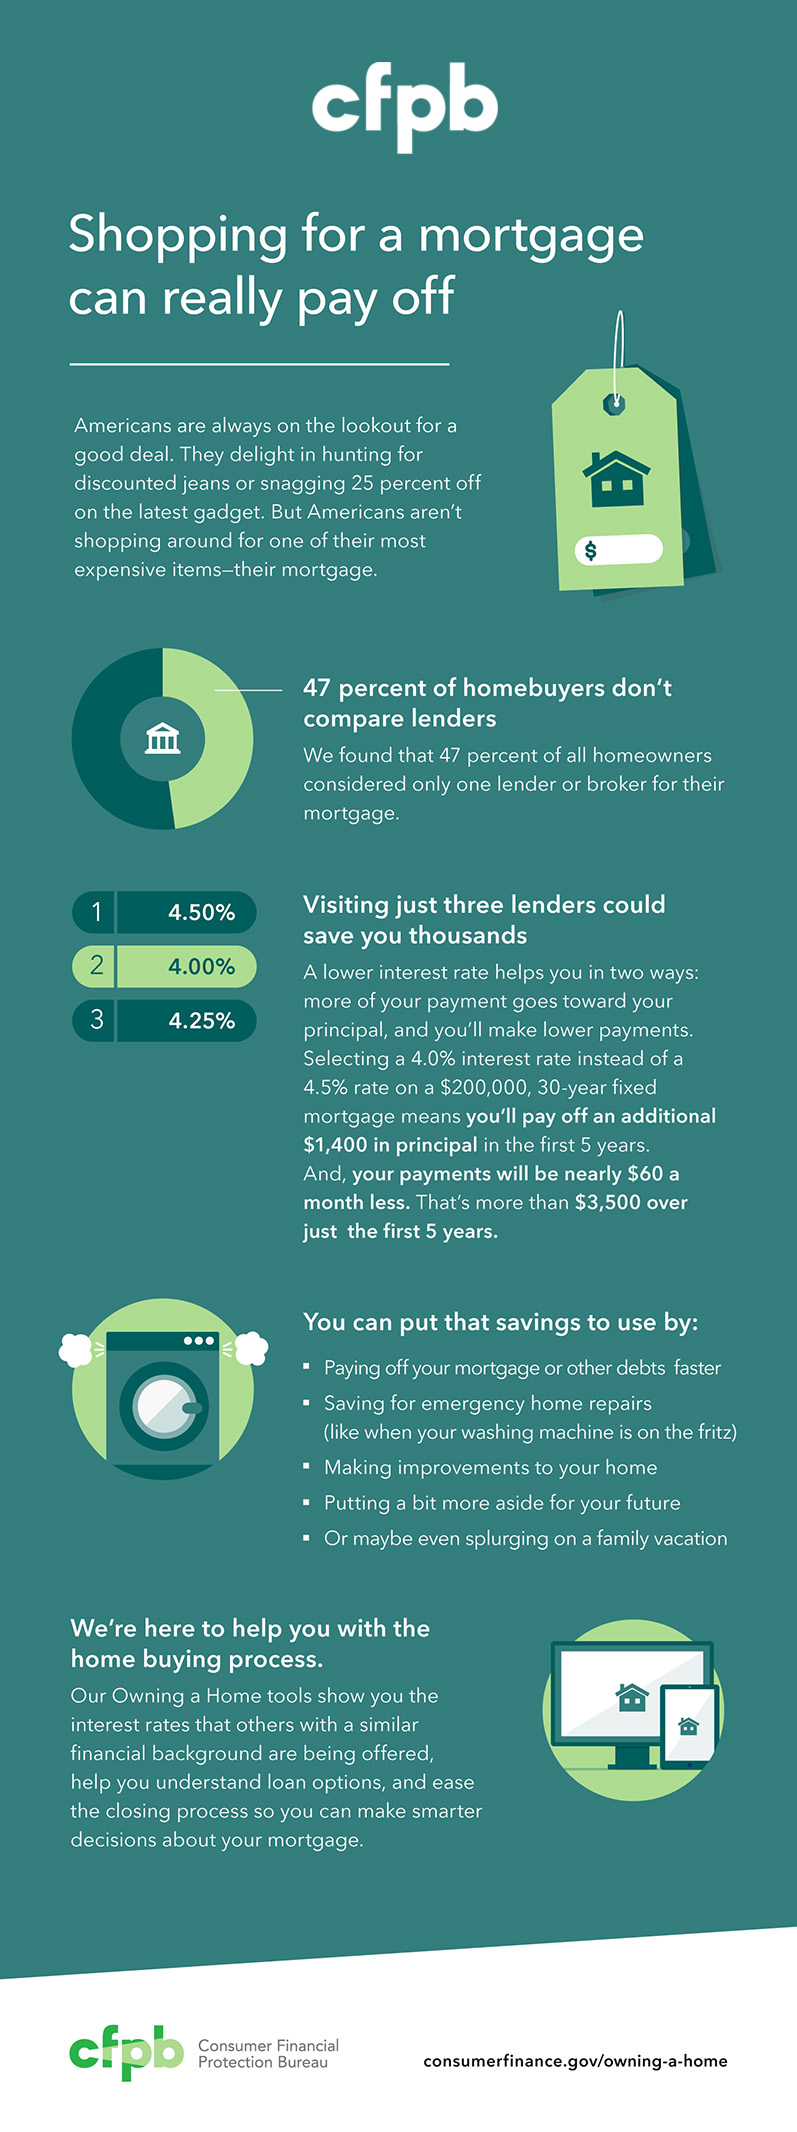 CFPB mortgage shopping infographic